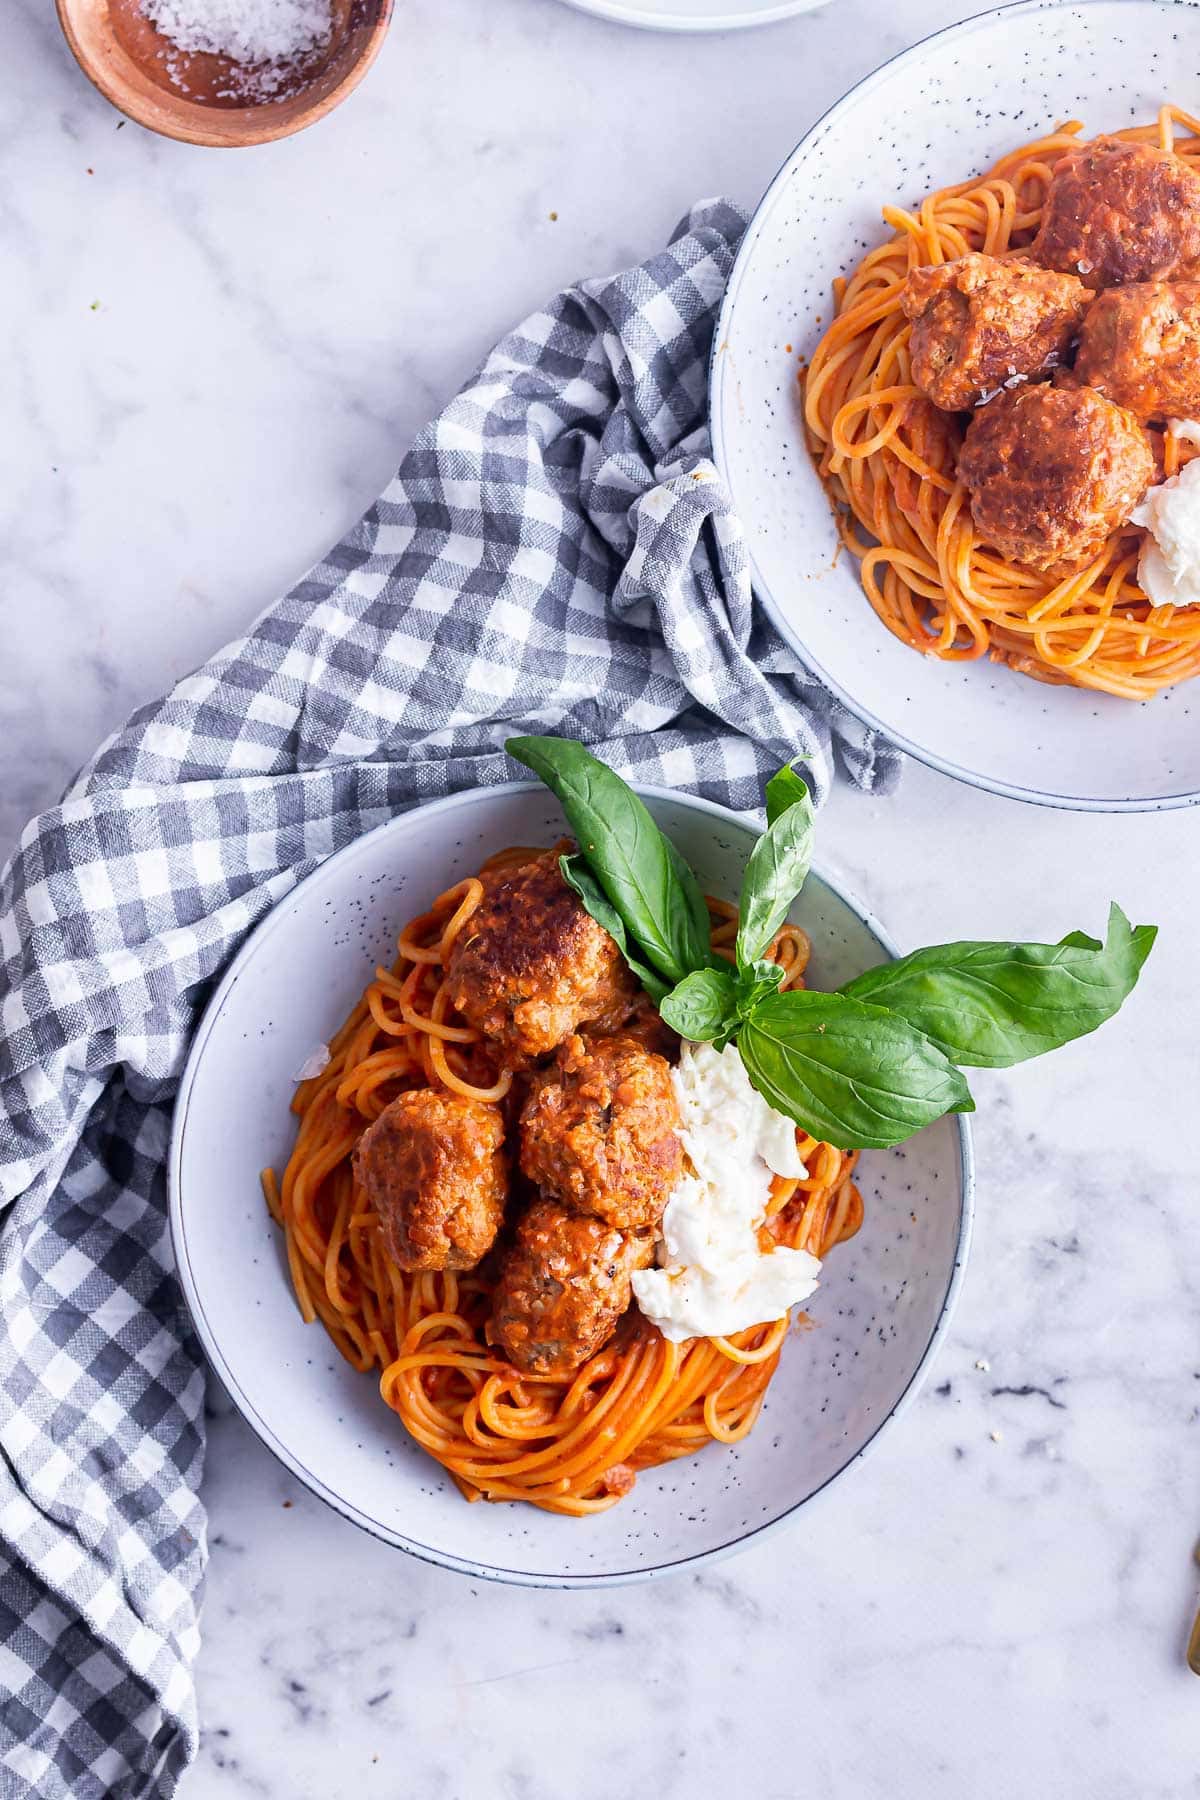 Overhead shot of two bowls of spaghetti meatballs with basil on a marble surface